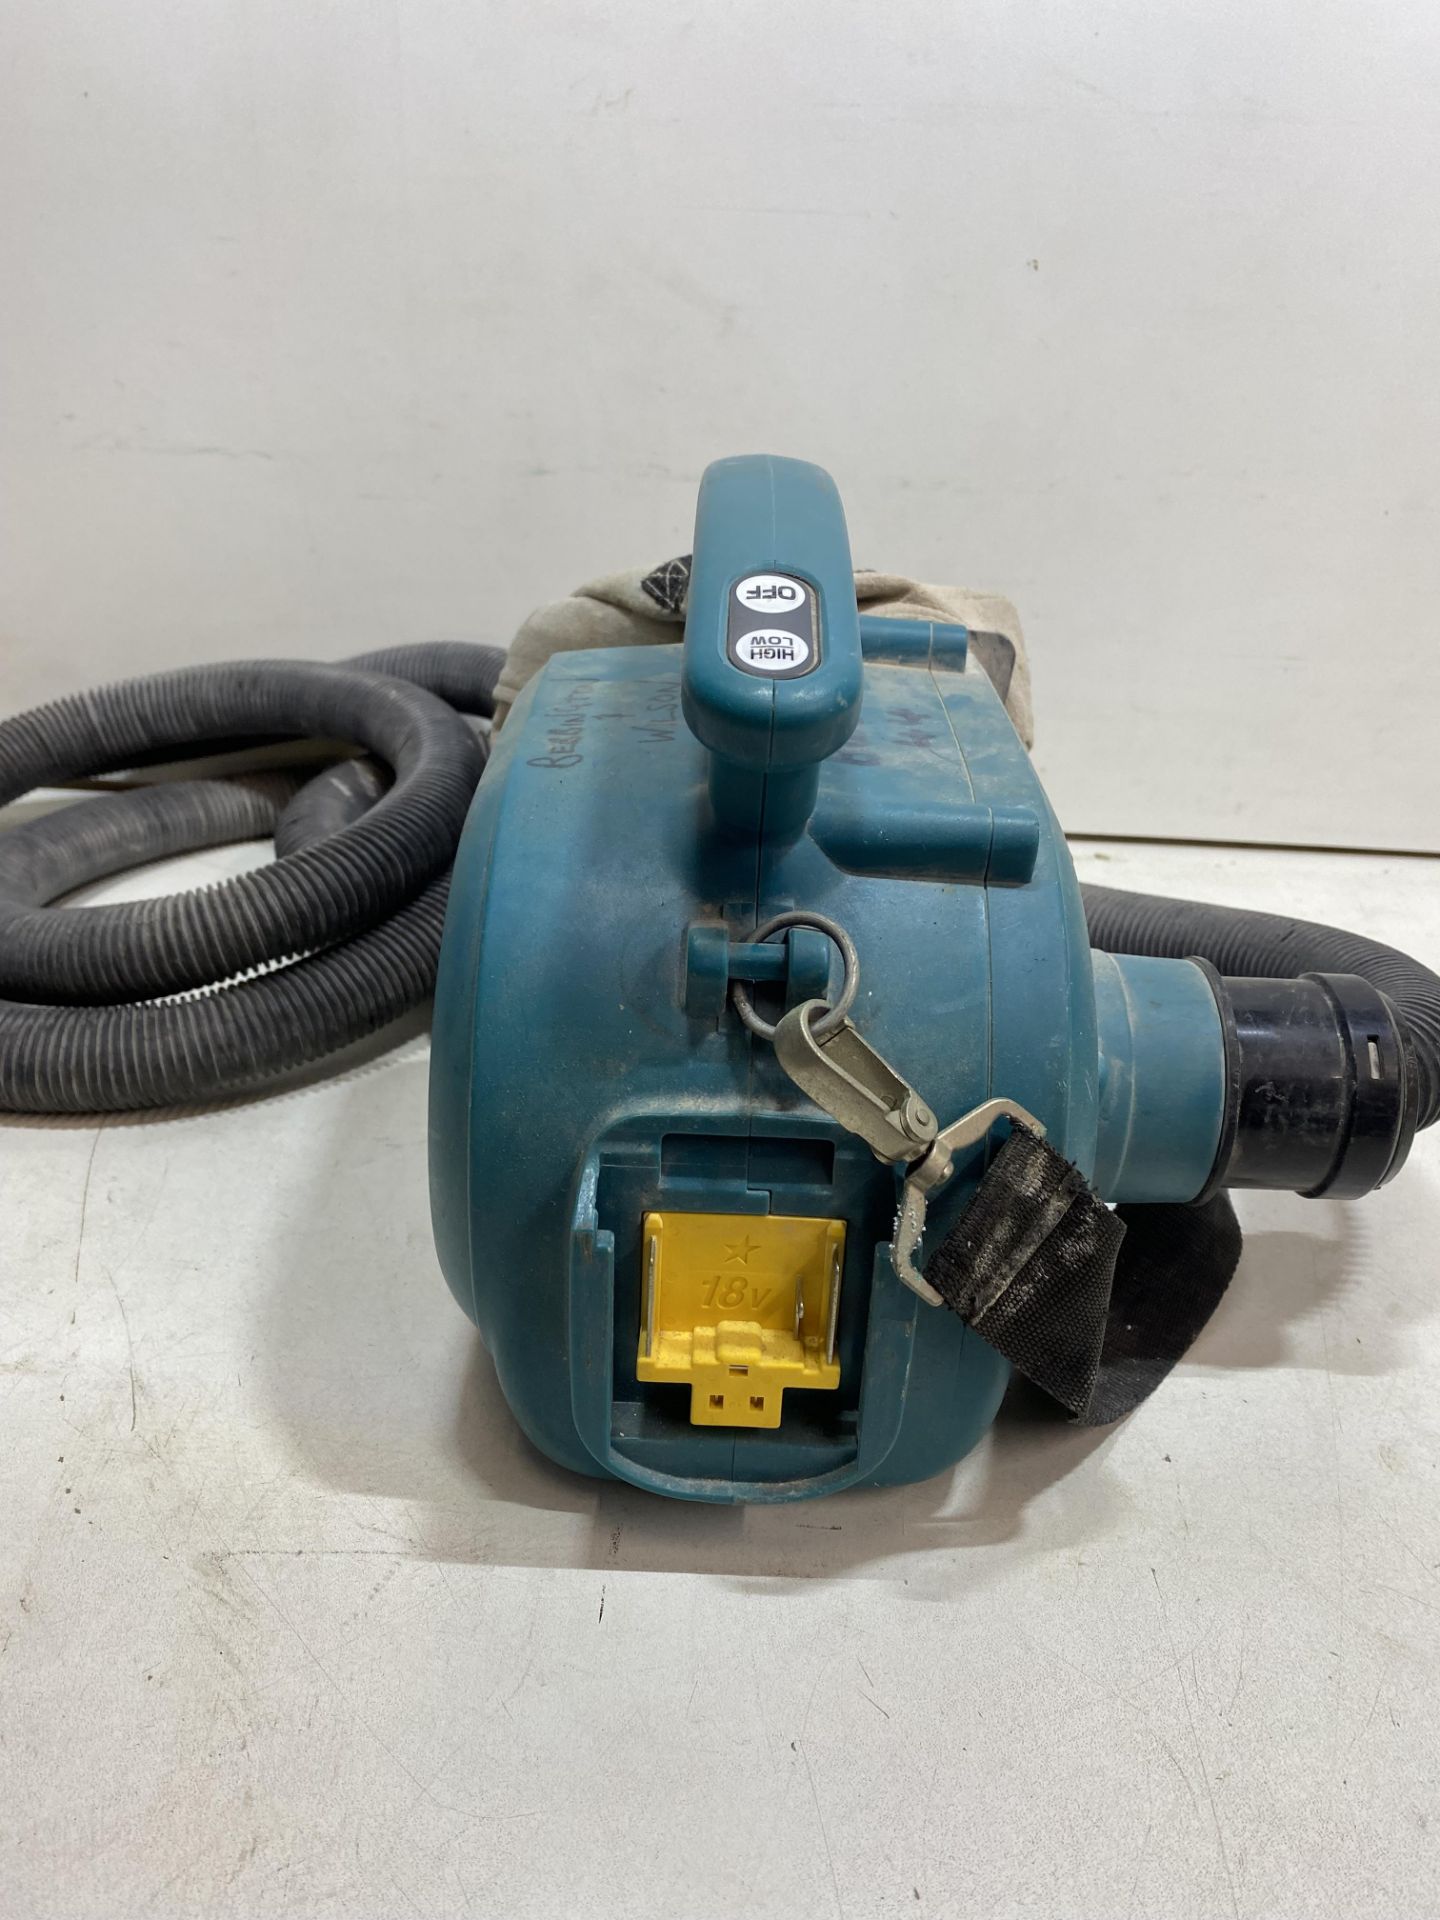 Makita BVC350 18v Dust Extractor - See Pictures - Image 4 of 7